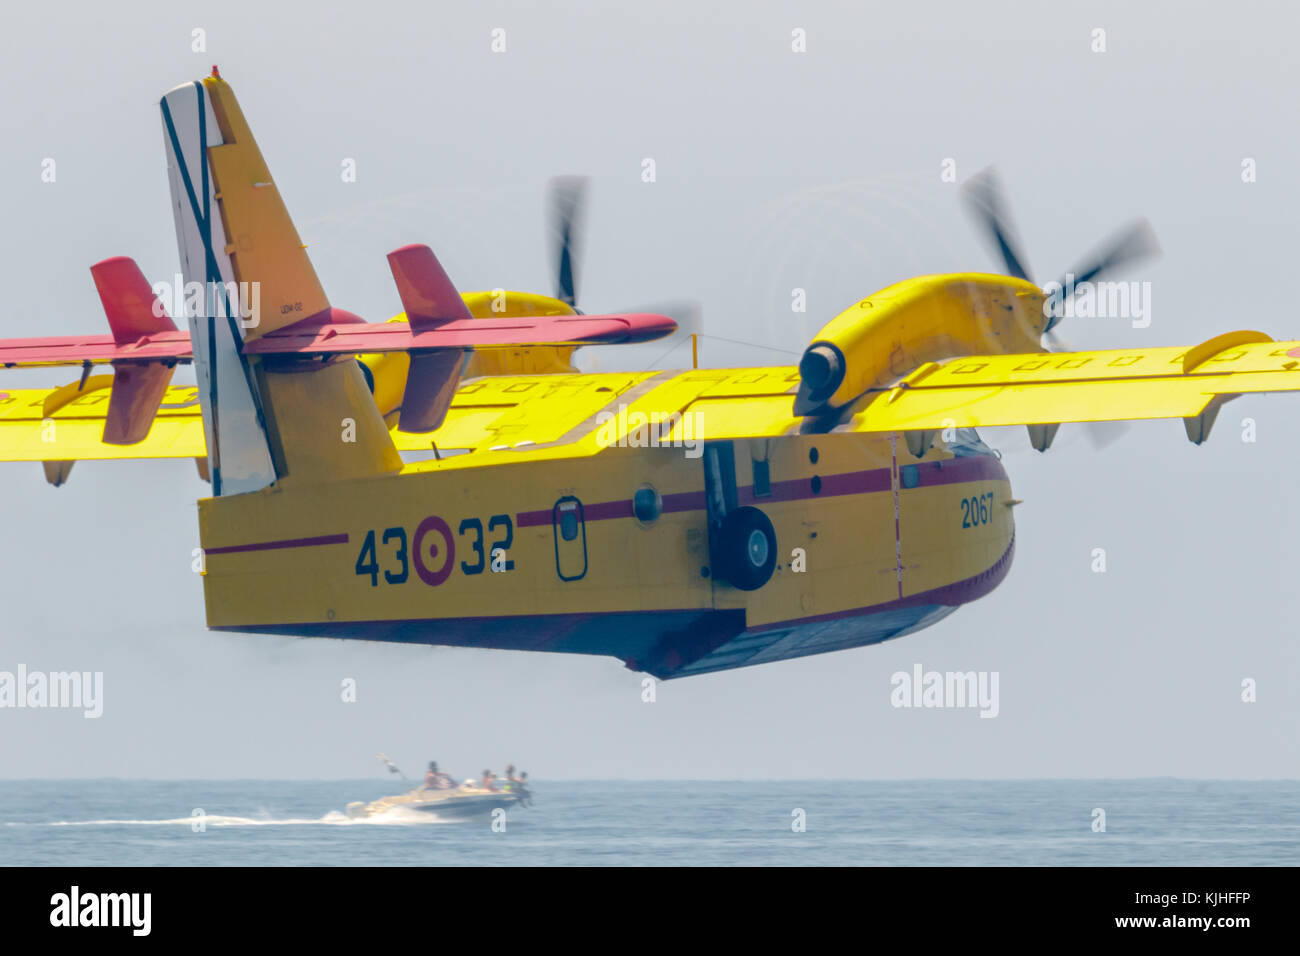 TORRE DEL MAR, MALAGA, SPAIN-JUL 28: Seaplane Canadair CL-215  taking part in a exhibition on the 2nd airshow of Torre del Mar on July 28, 2017, in To Stock Photo